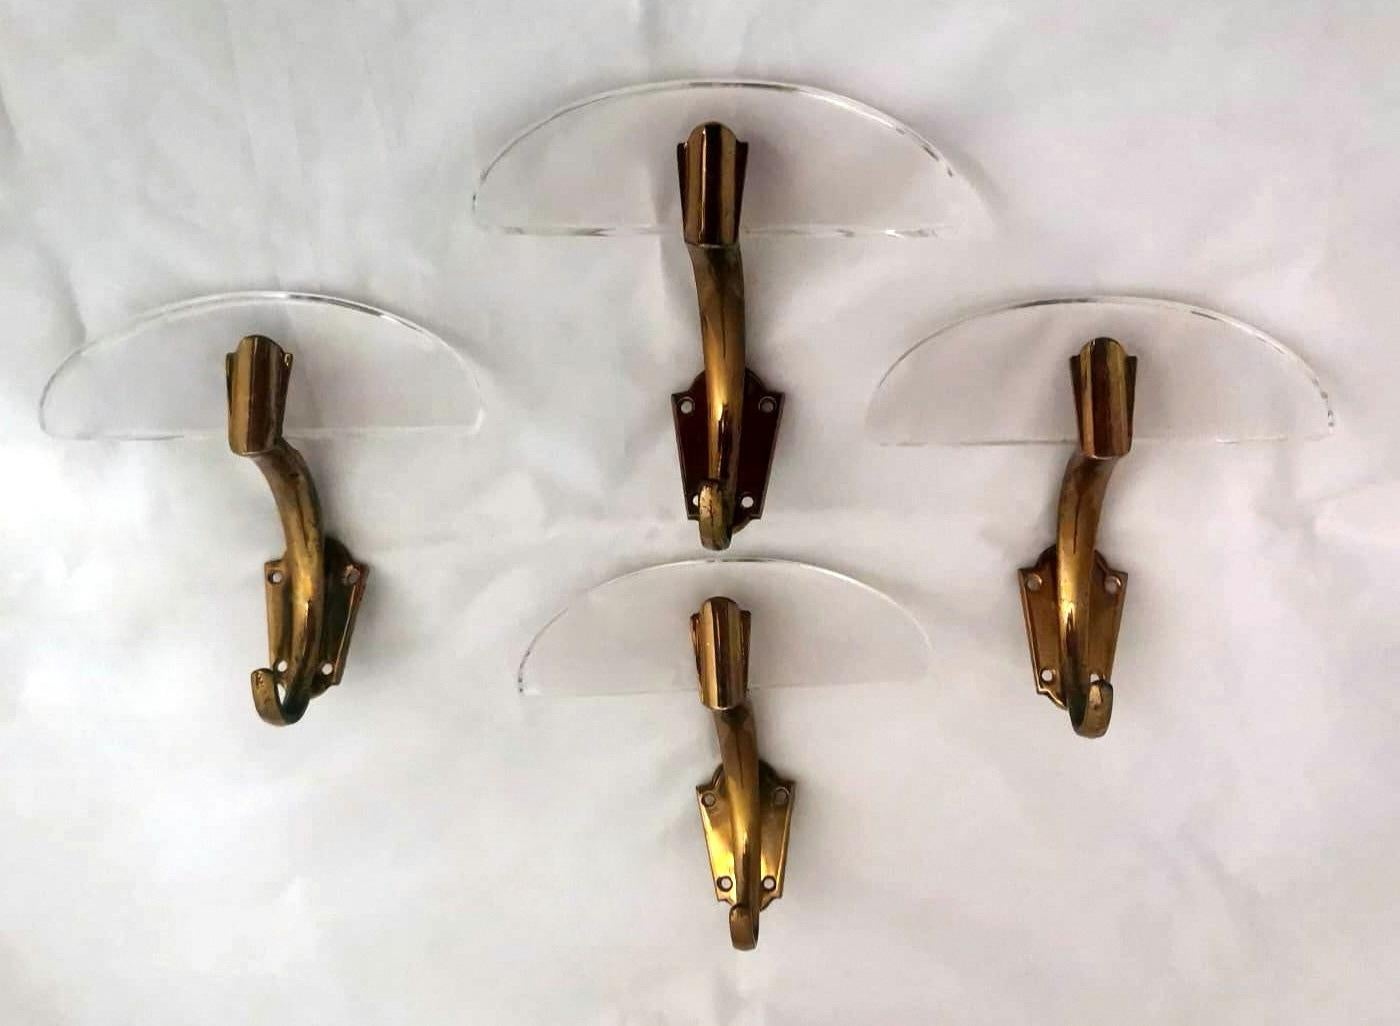 We kindly suggest you read the whole description, because with it we try to give you detailed technical and historical information to guarantee the authenticity of our objects.
Vintage set consisting of four Italian coat-hangers; they are